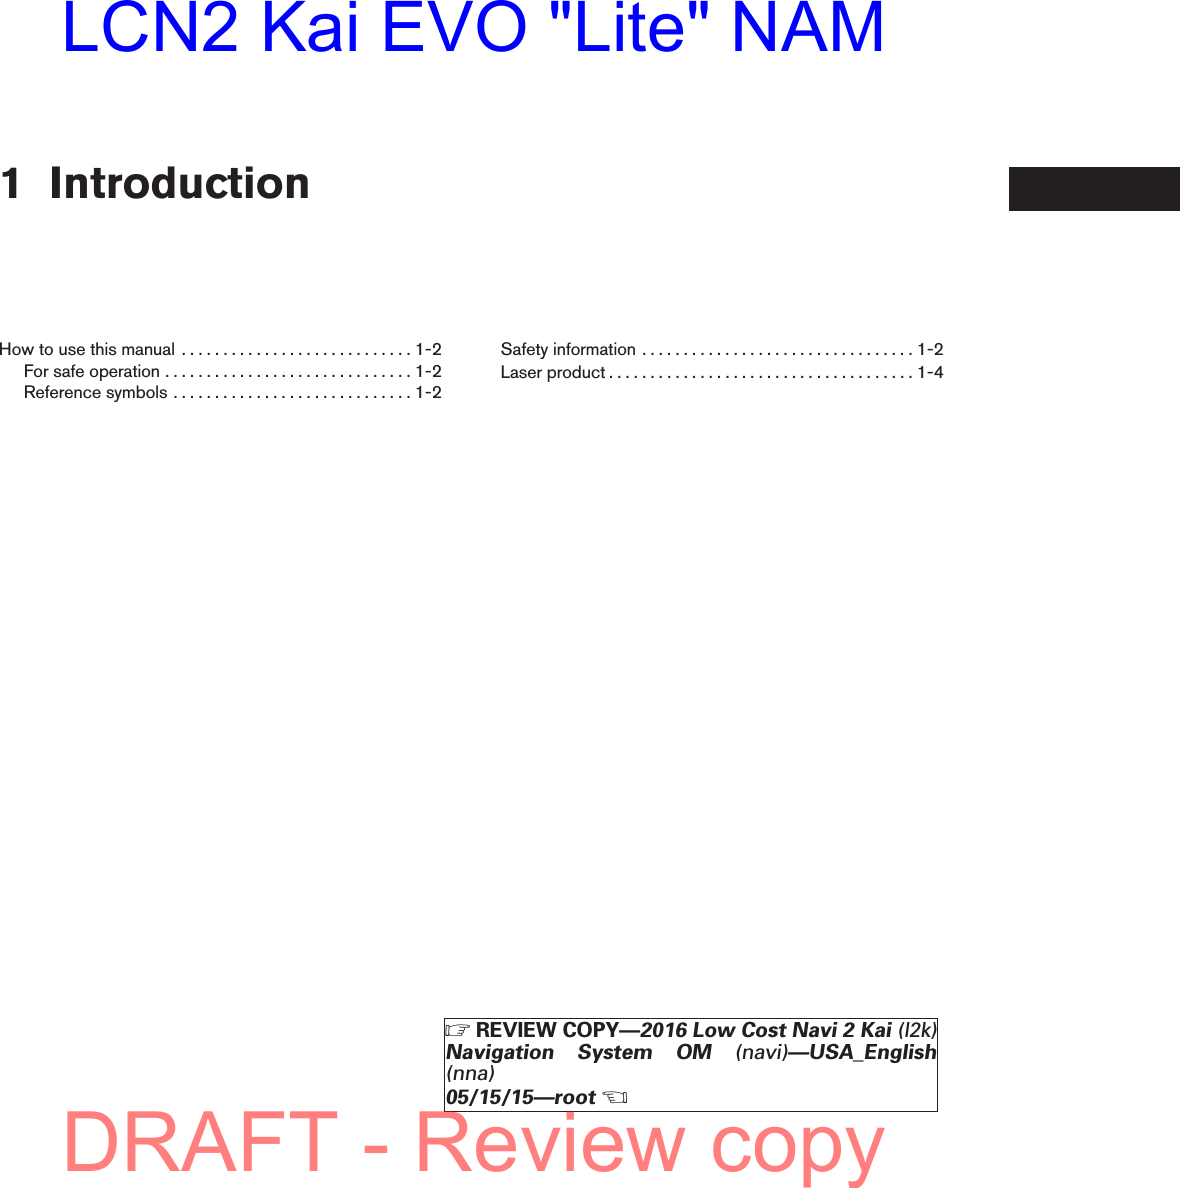 1 IntroductionHowtousethismanual ............................1-2Forsafeoperation..............................1-2Referencesymbols.............................1-2Safetyinformation.................................1-2Laserproduct.....................................1-4੬REVIEW COPY—2016 Low Cost Navi 2 Kai (l2k)Navigation System OM (navi)—USA_English(nna)05/15/15—root੭DRAFT - Review copyLCN2 Kai EVO &quot;Lite&quot; NAM